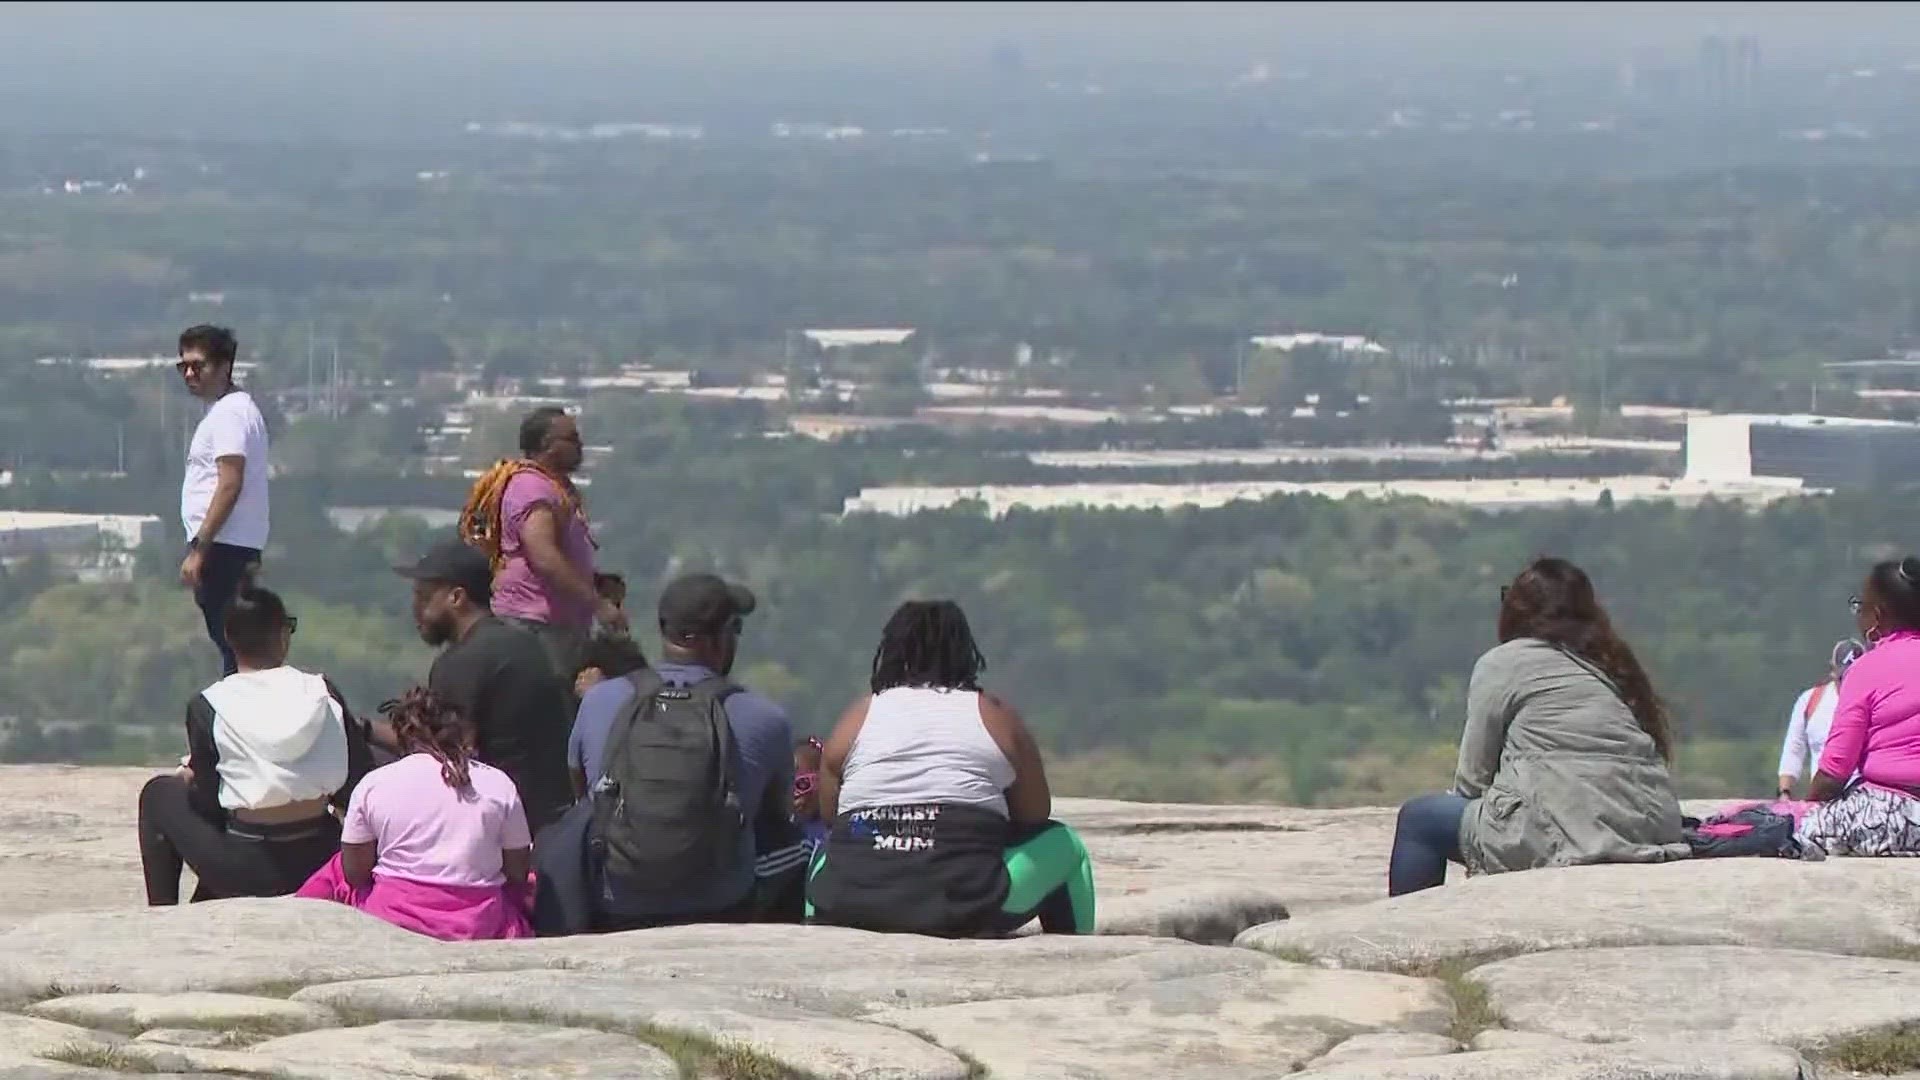 Hundreds of people flocked to the mountain top to watch the eclipse Monday.